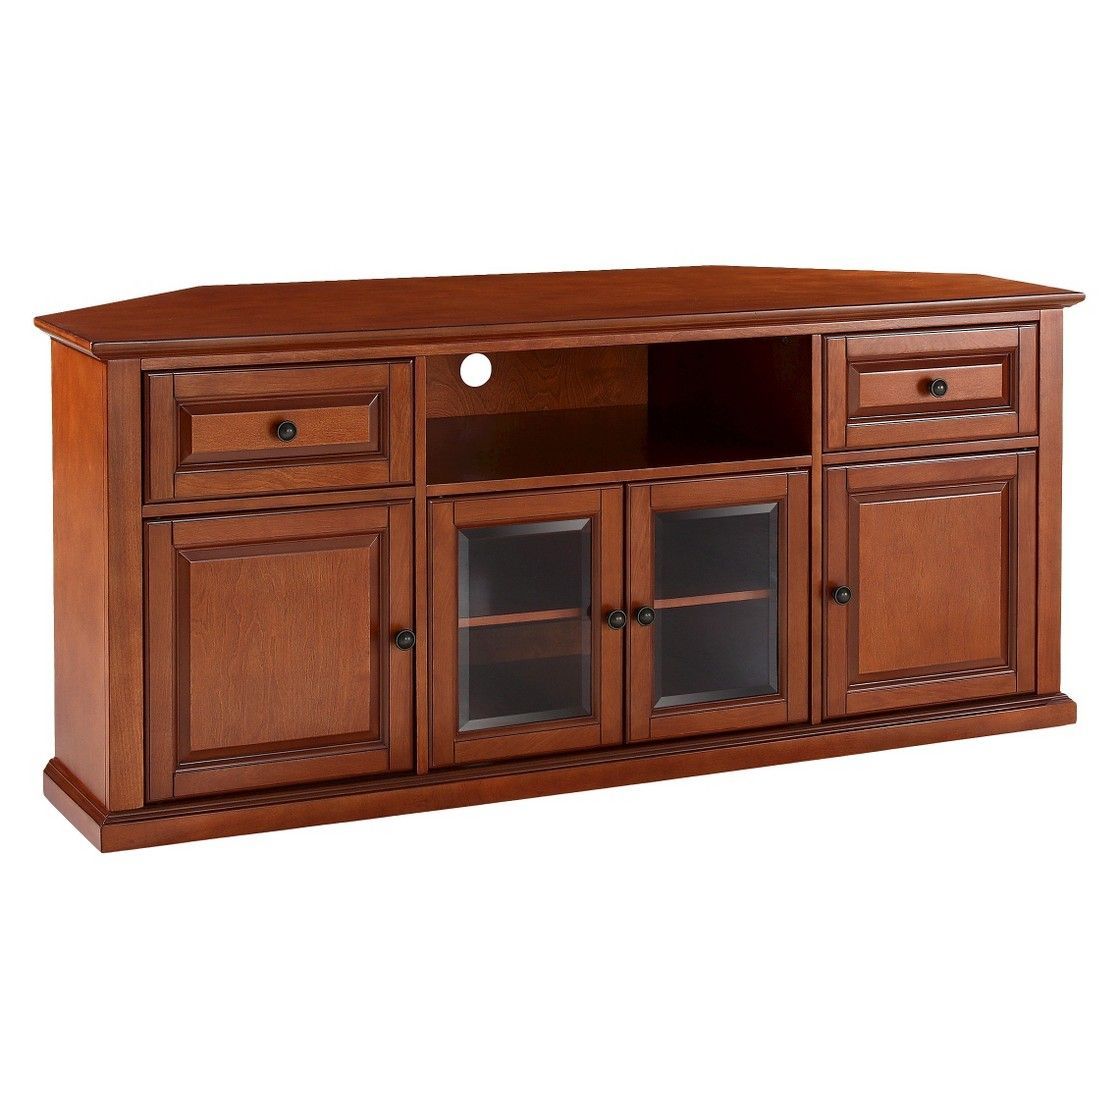 Shelby Corner Tv Stand For Tvs Up To 65" – Crosley With Modern Corner Tv Units (View 3 of 15)